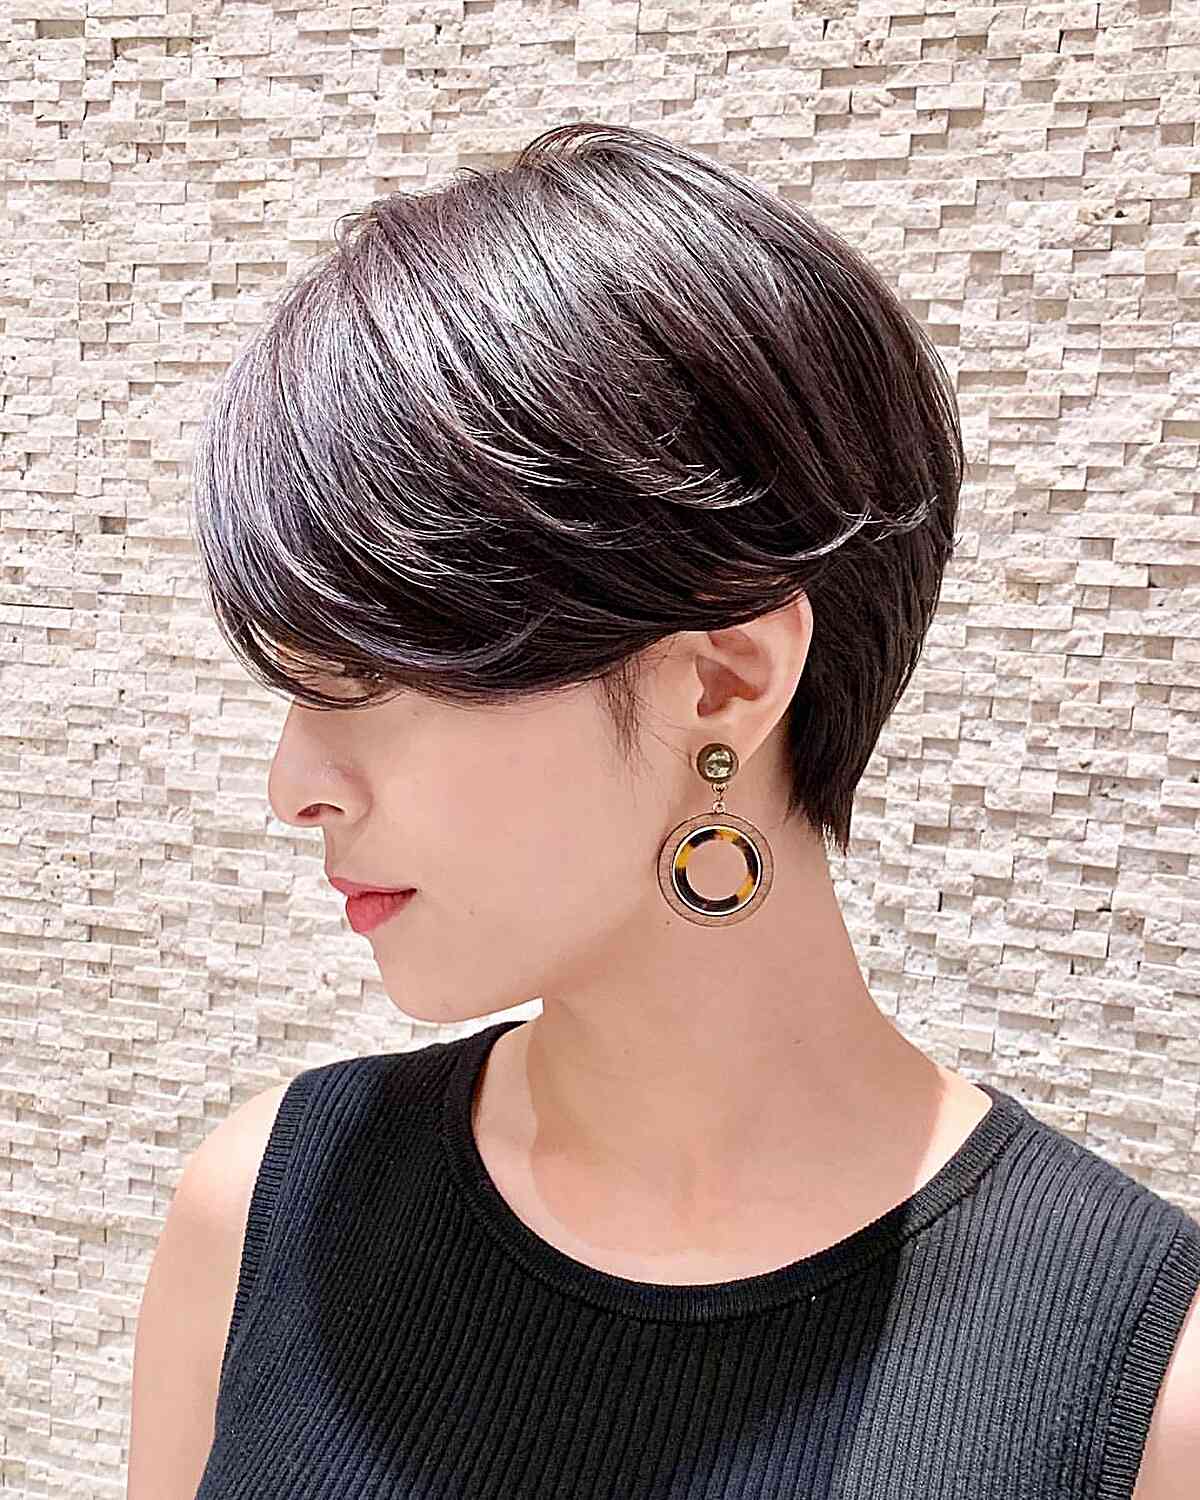 Discover 159+ chinese short hairstyles latest